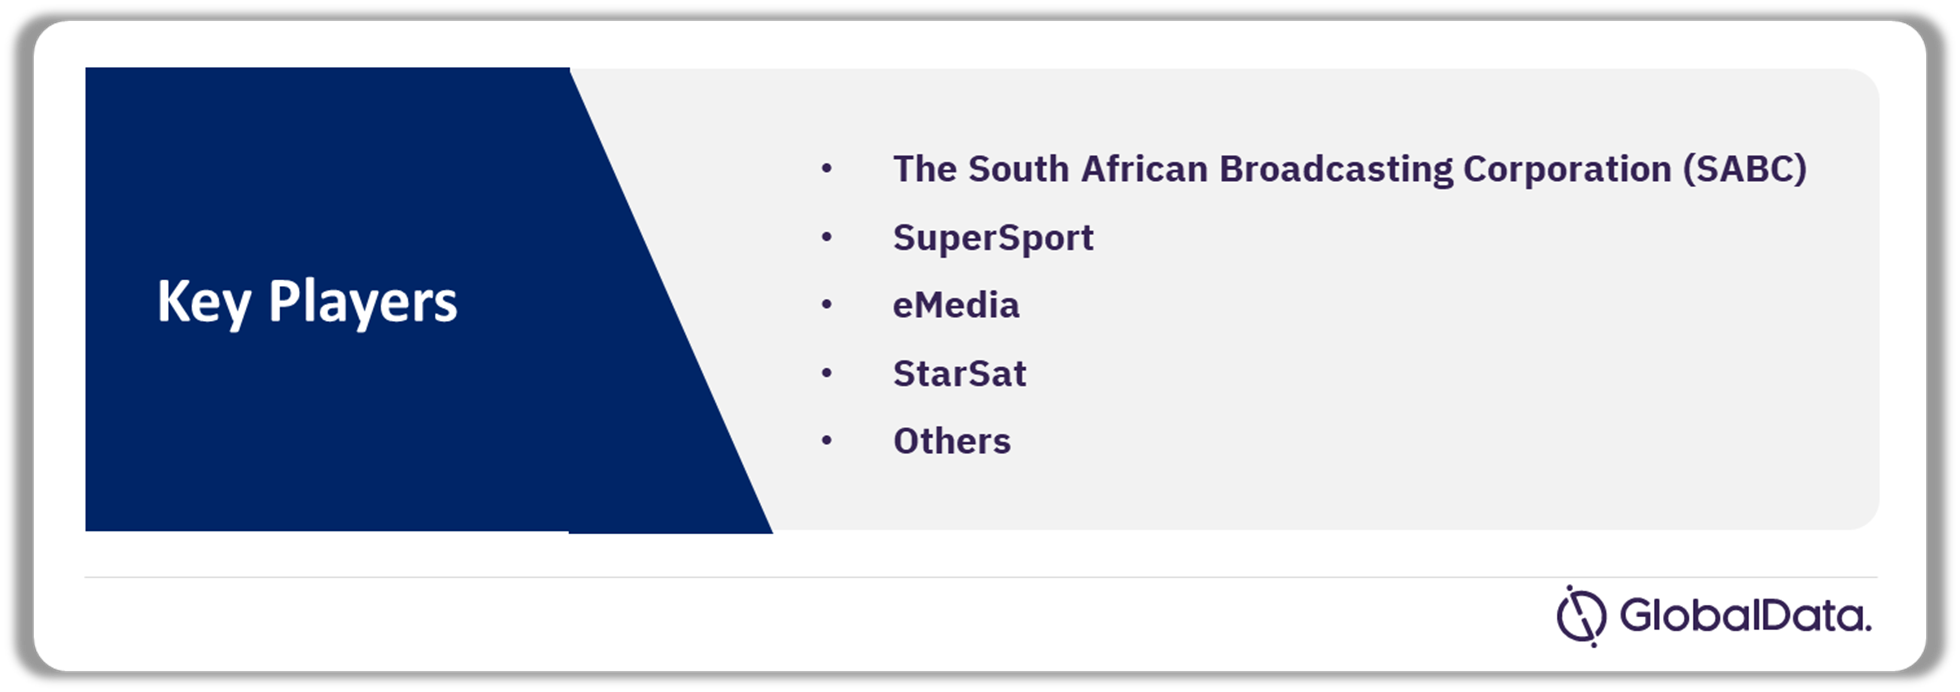 South Africa Sports Broadcasting Media Market Analysis, by Broadcasters